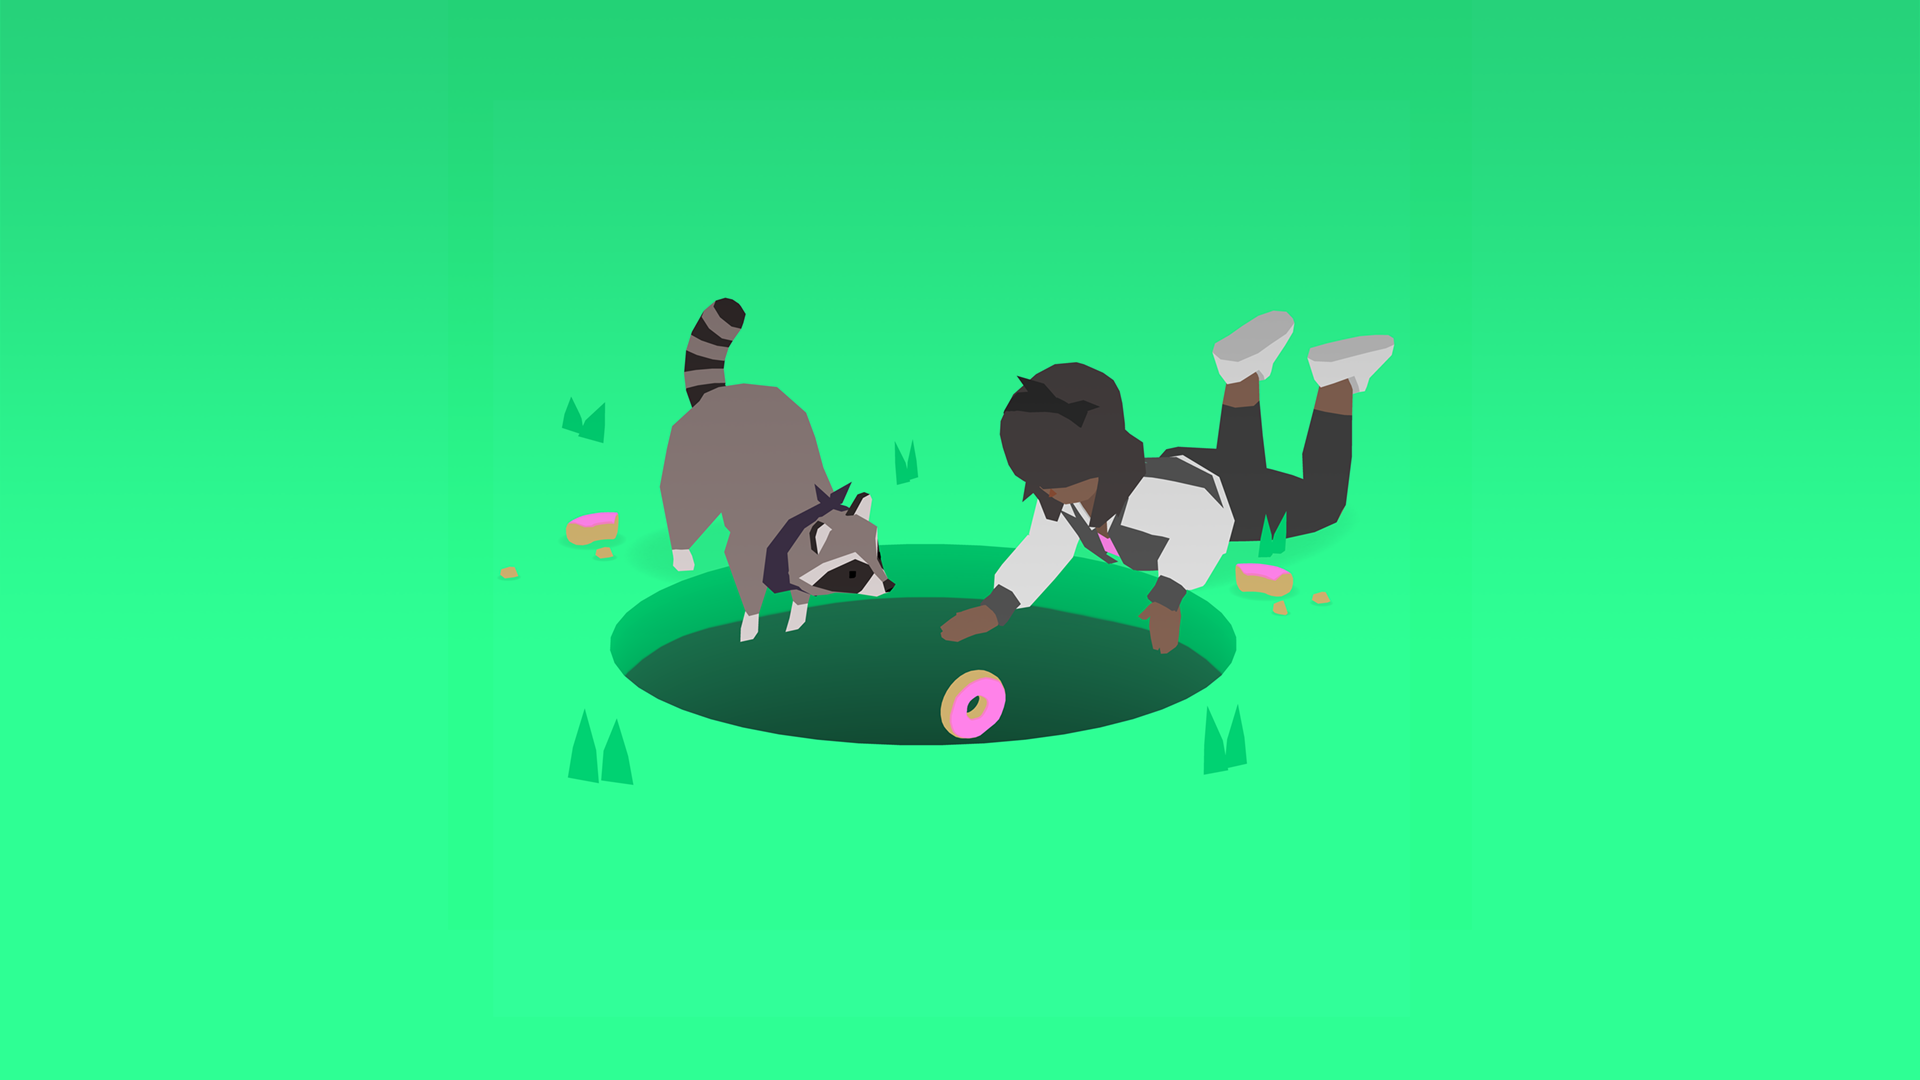 Extra scene. Donut County. Donut County Мусоропедия. Donut County ящерица. Donut County chat.